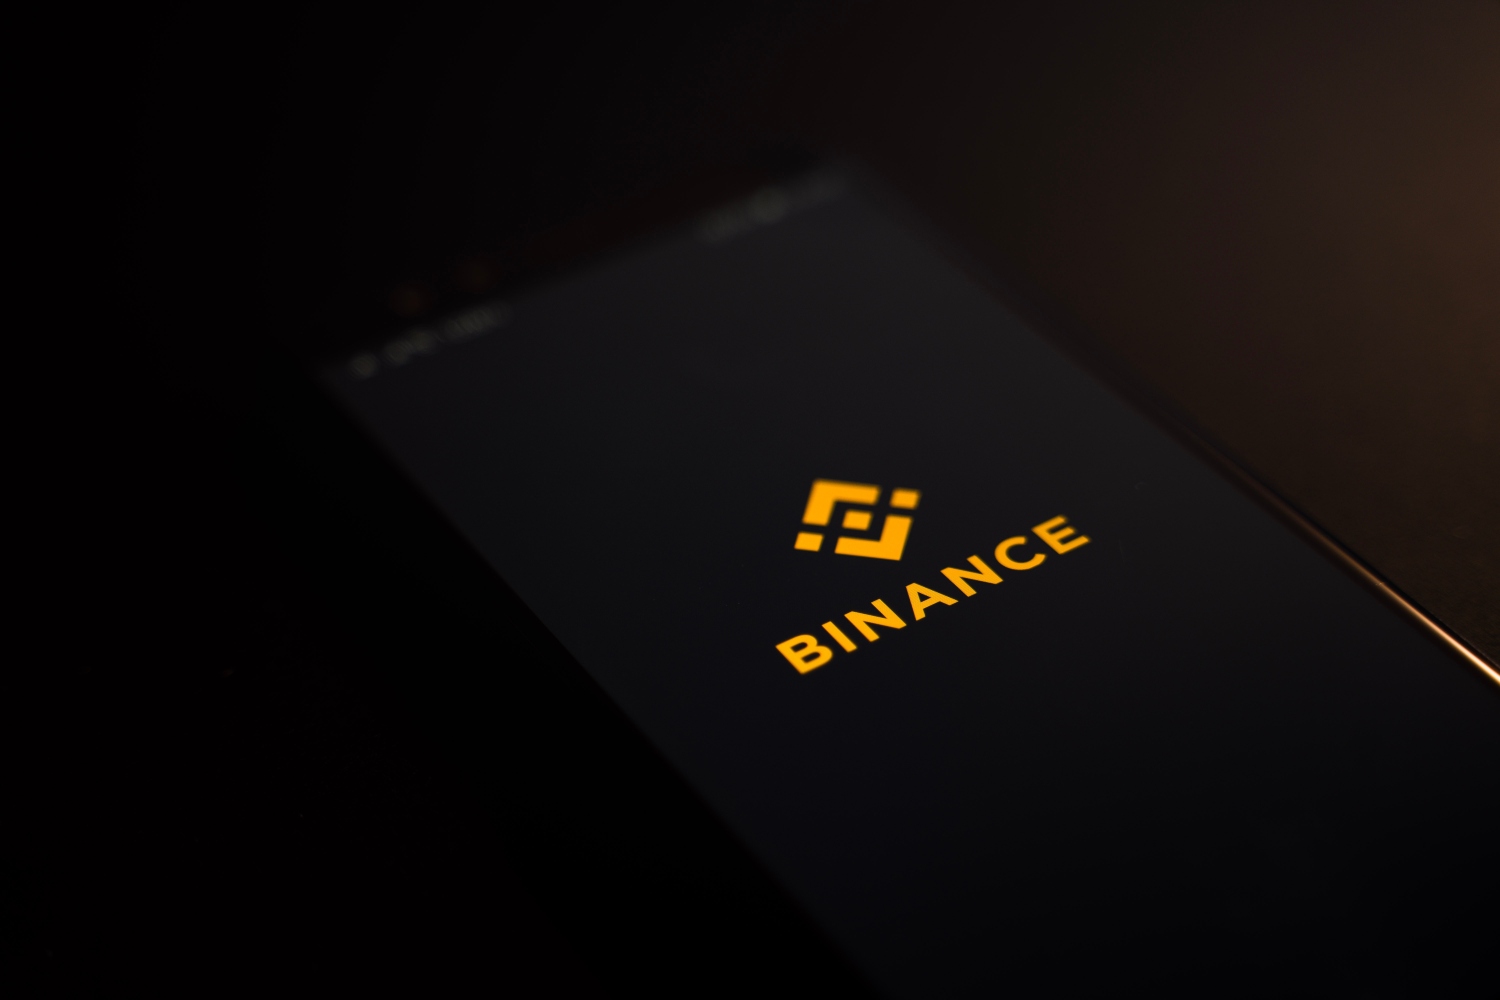 Binance Launches Wrapped Beacon ETH (WBETH) a Liquid Staking Token for Ethereum